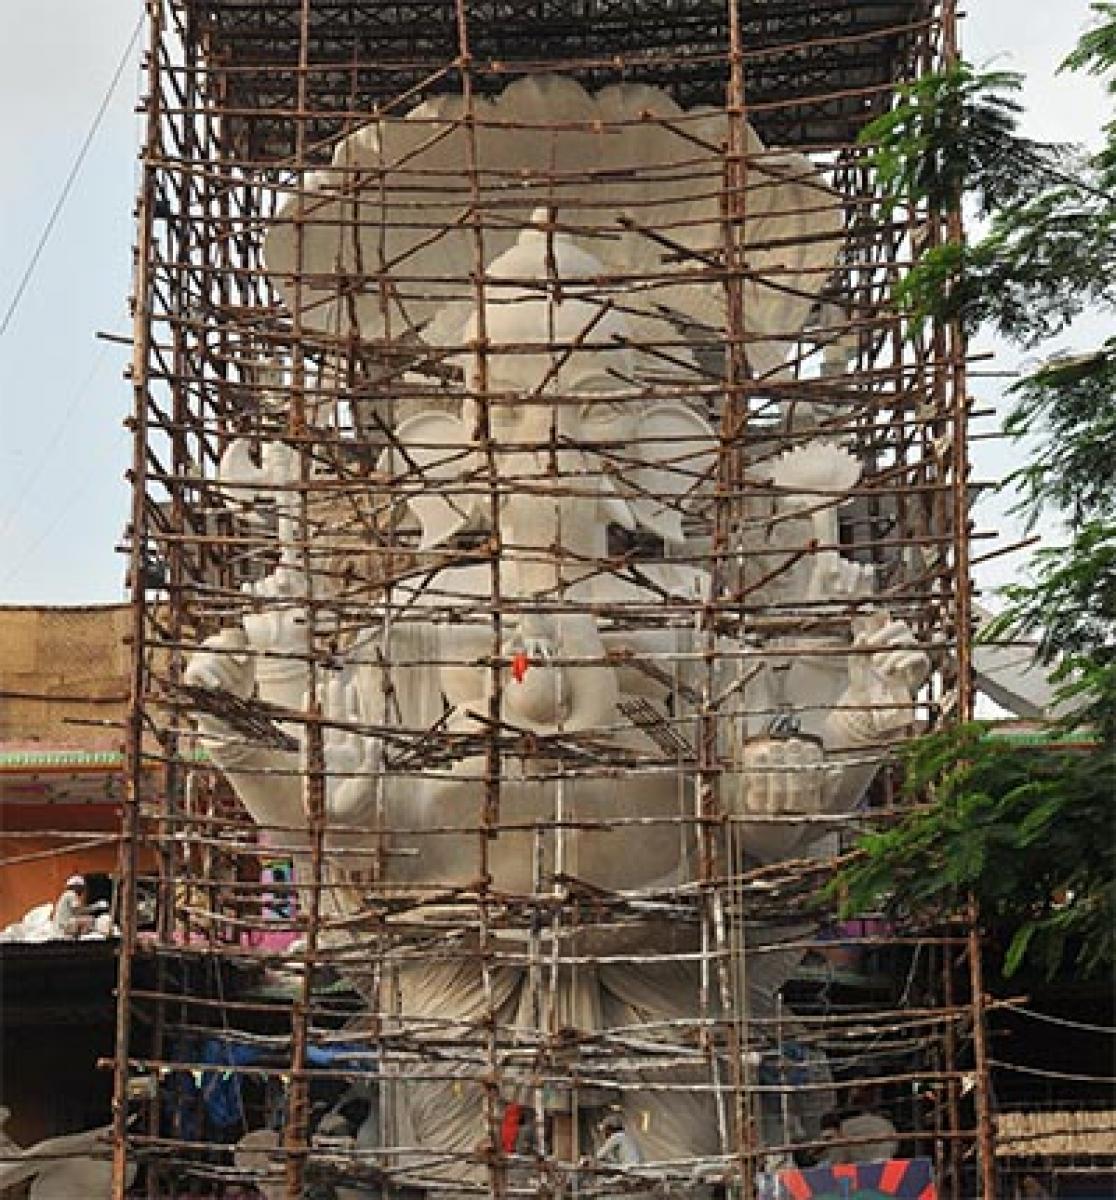 Huge Ganesh idol getting readied for the ensuing Ganesh festivities at Khairatabad in Hyderabad